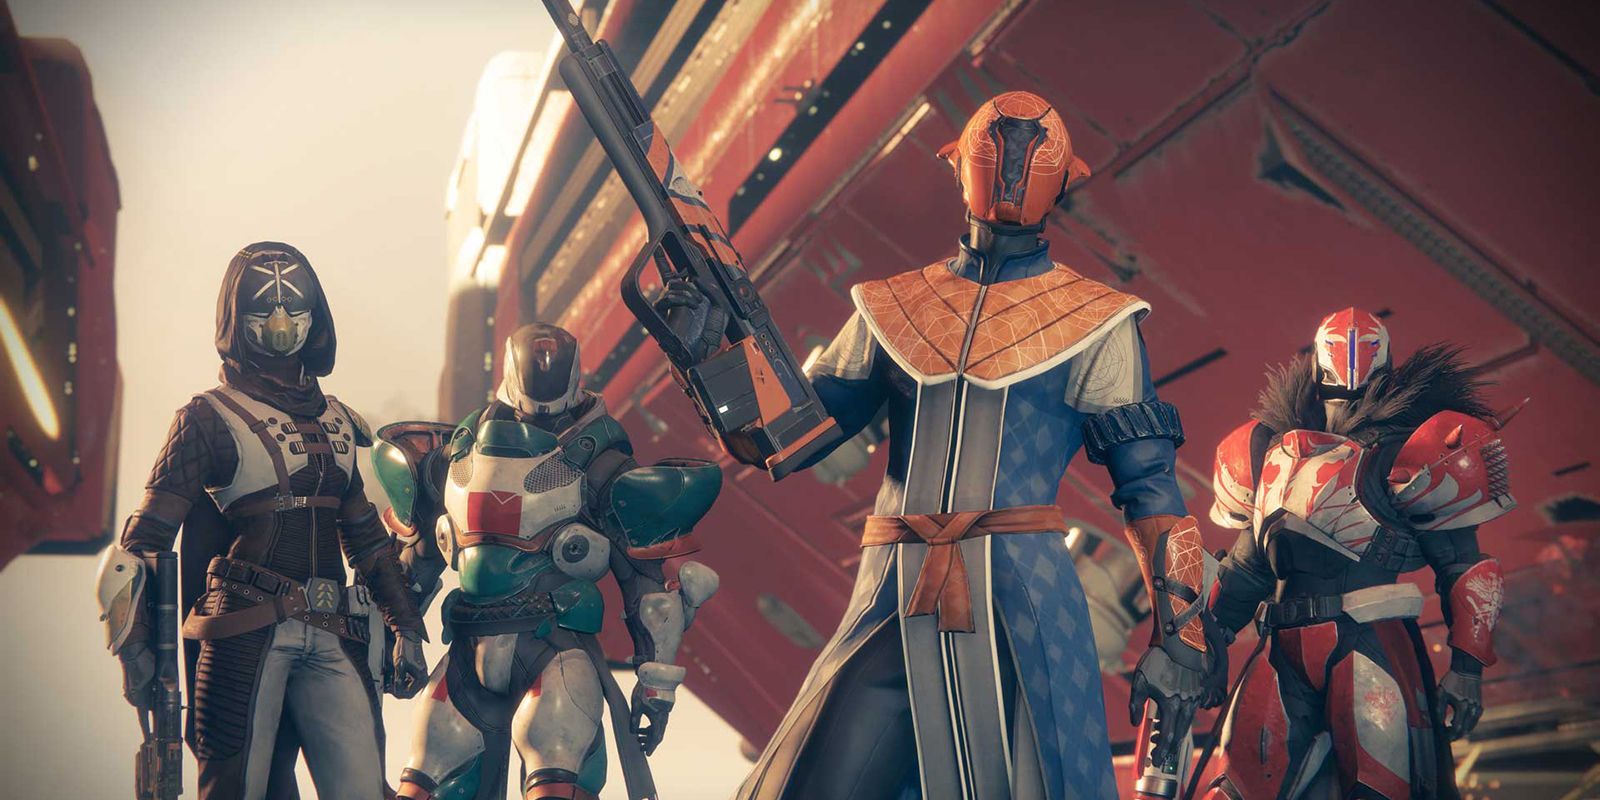 Destiny 2 Control fighters in masks holding weapons near ship